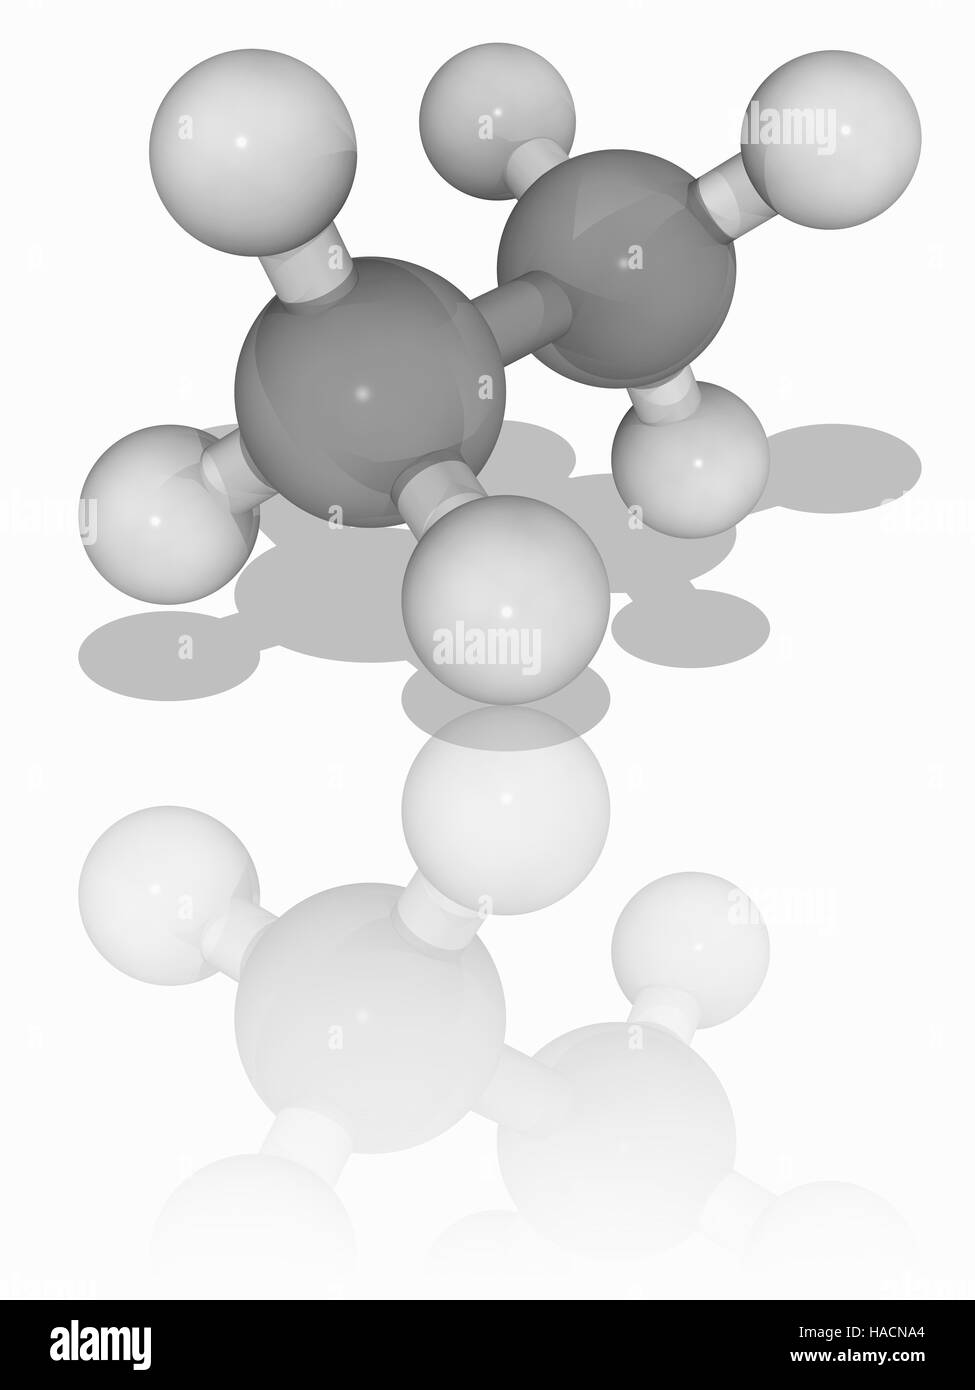 Ethane. Molecular model of the hydrocarbon alkane gas ethane (C2.H6). This colourless, odourless gas is isolated on an industrial scale from natural gas. It is also formed as a by-product of petroleum refining. Atoms are represented as spheres and are colour-coded: carbon (grey) and hydrogen (white). Illustration. Stock Photo